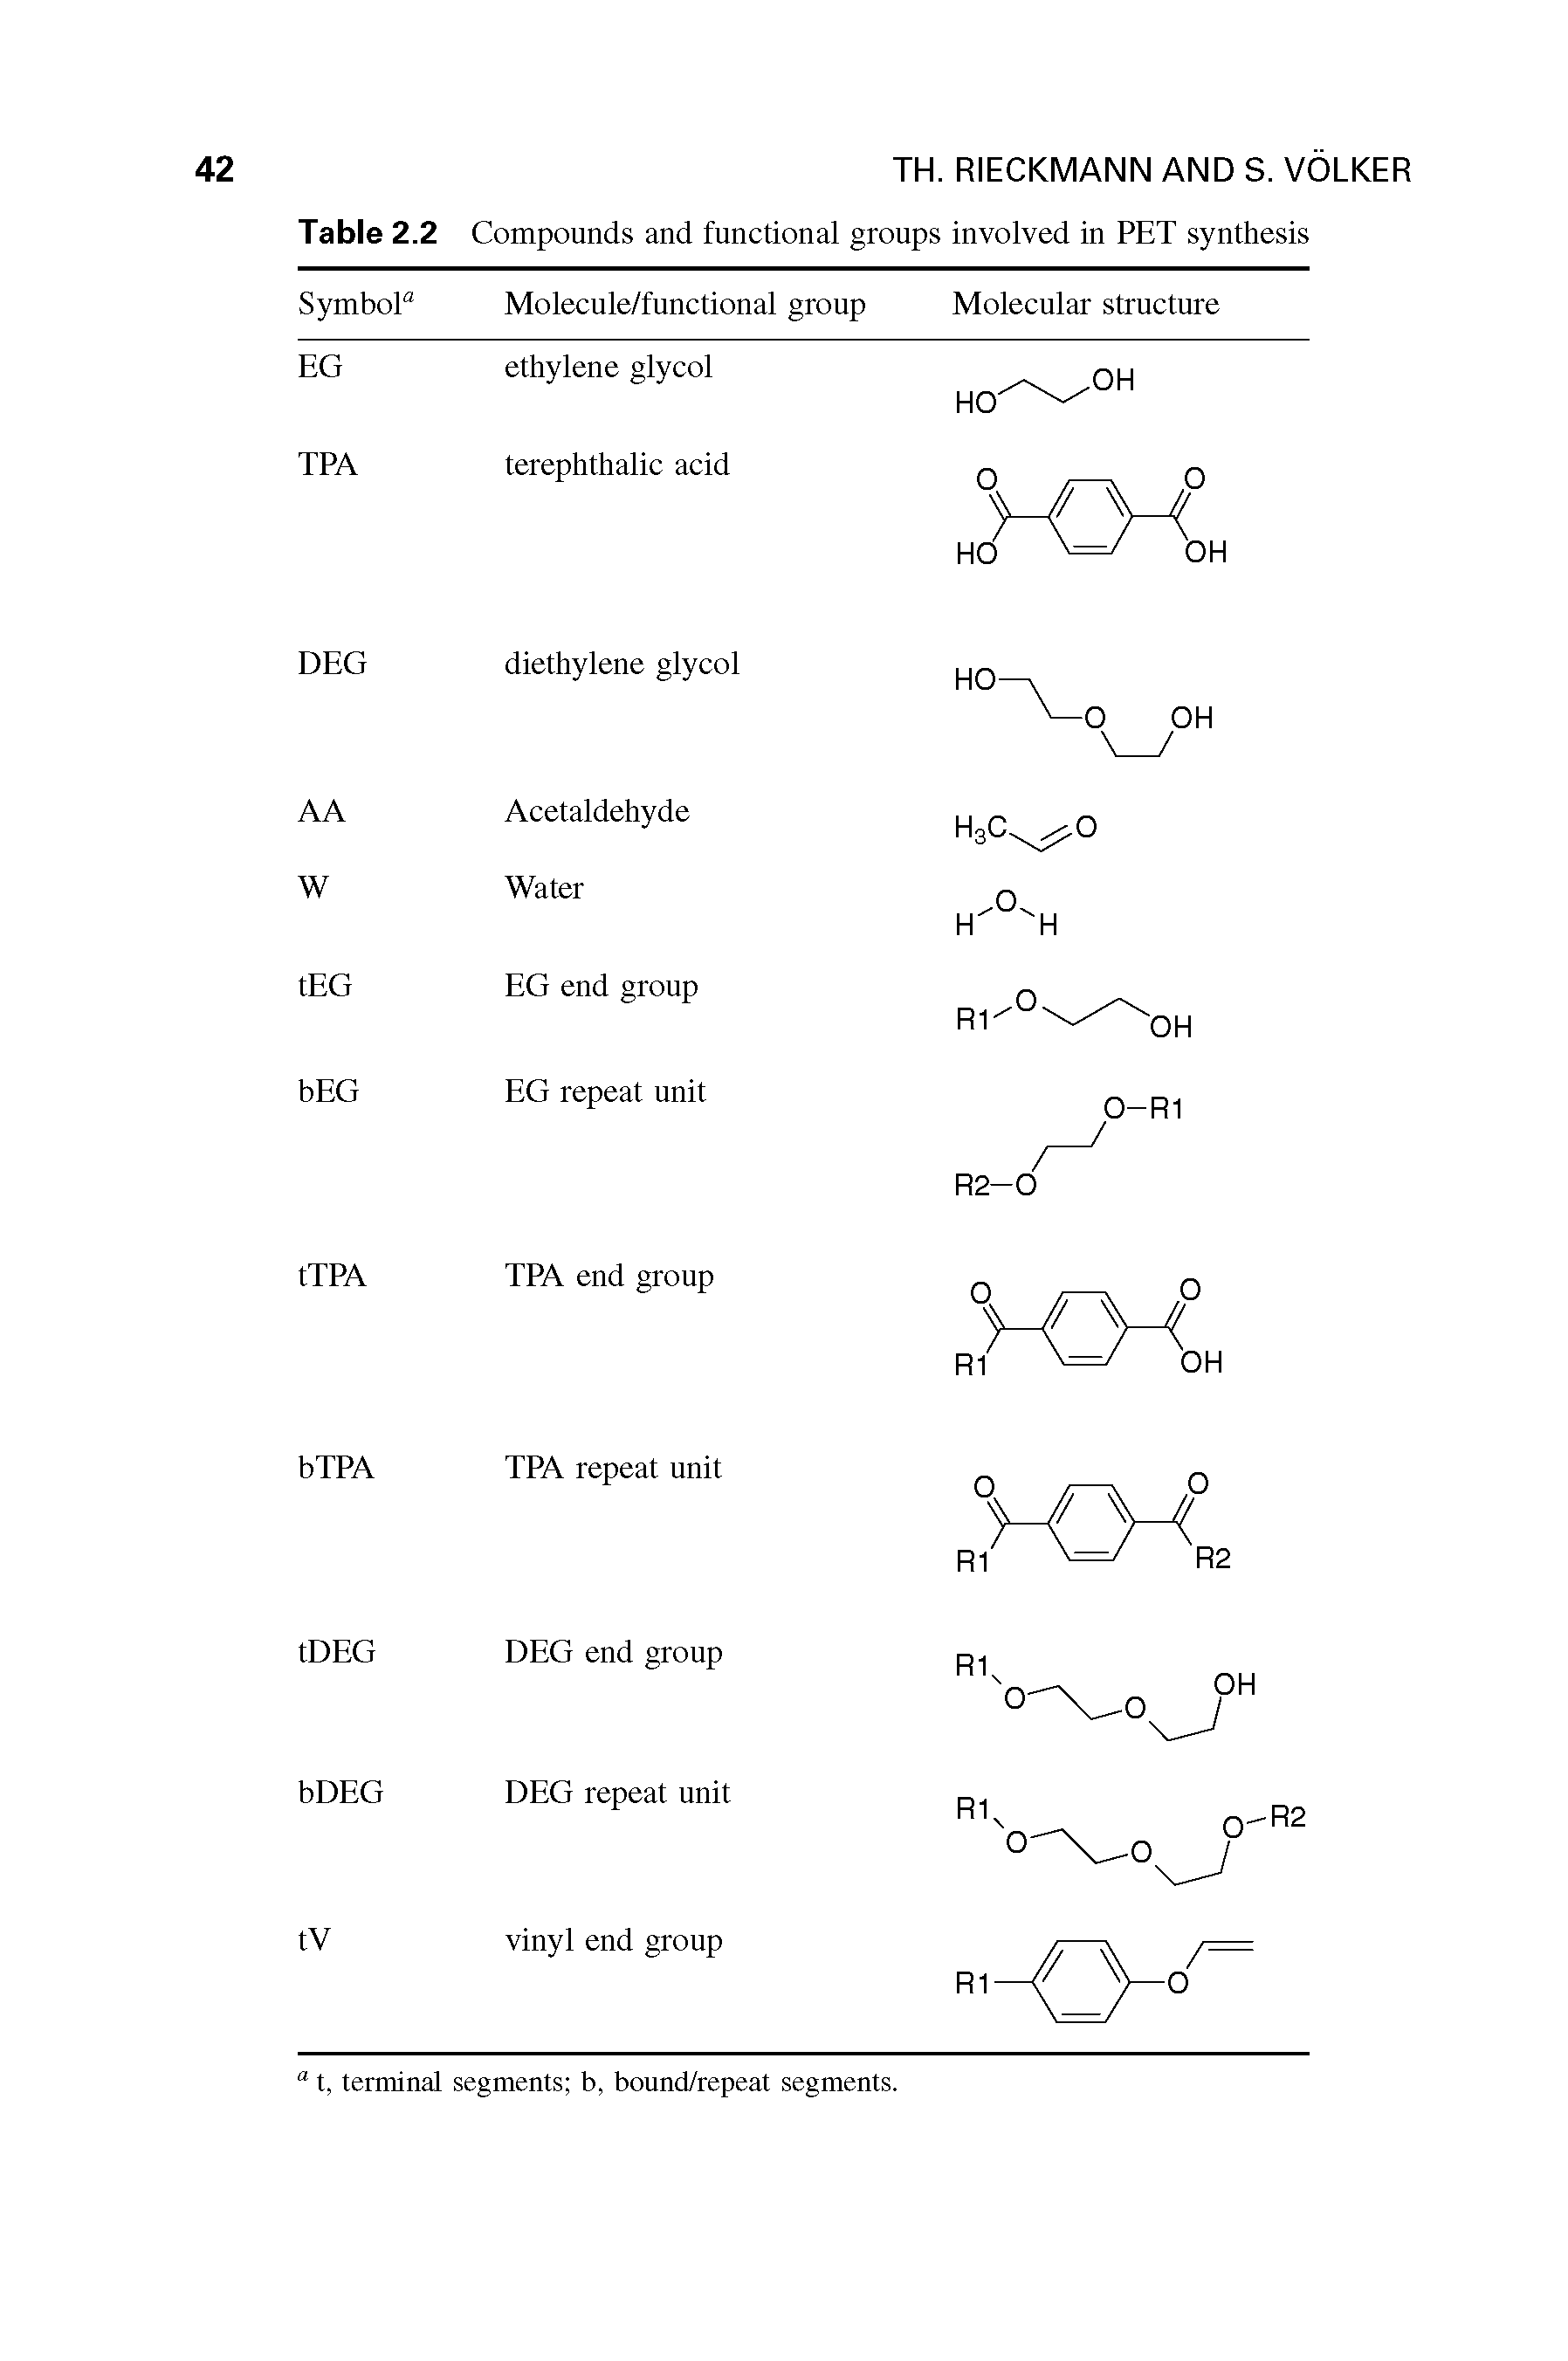 Table 2.2 Compounds and functional groups involved in PET synthesis ...